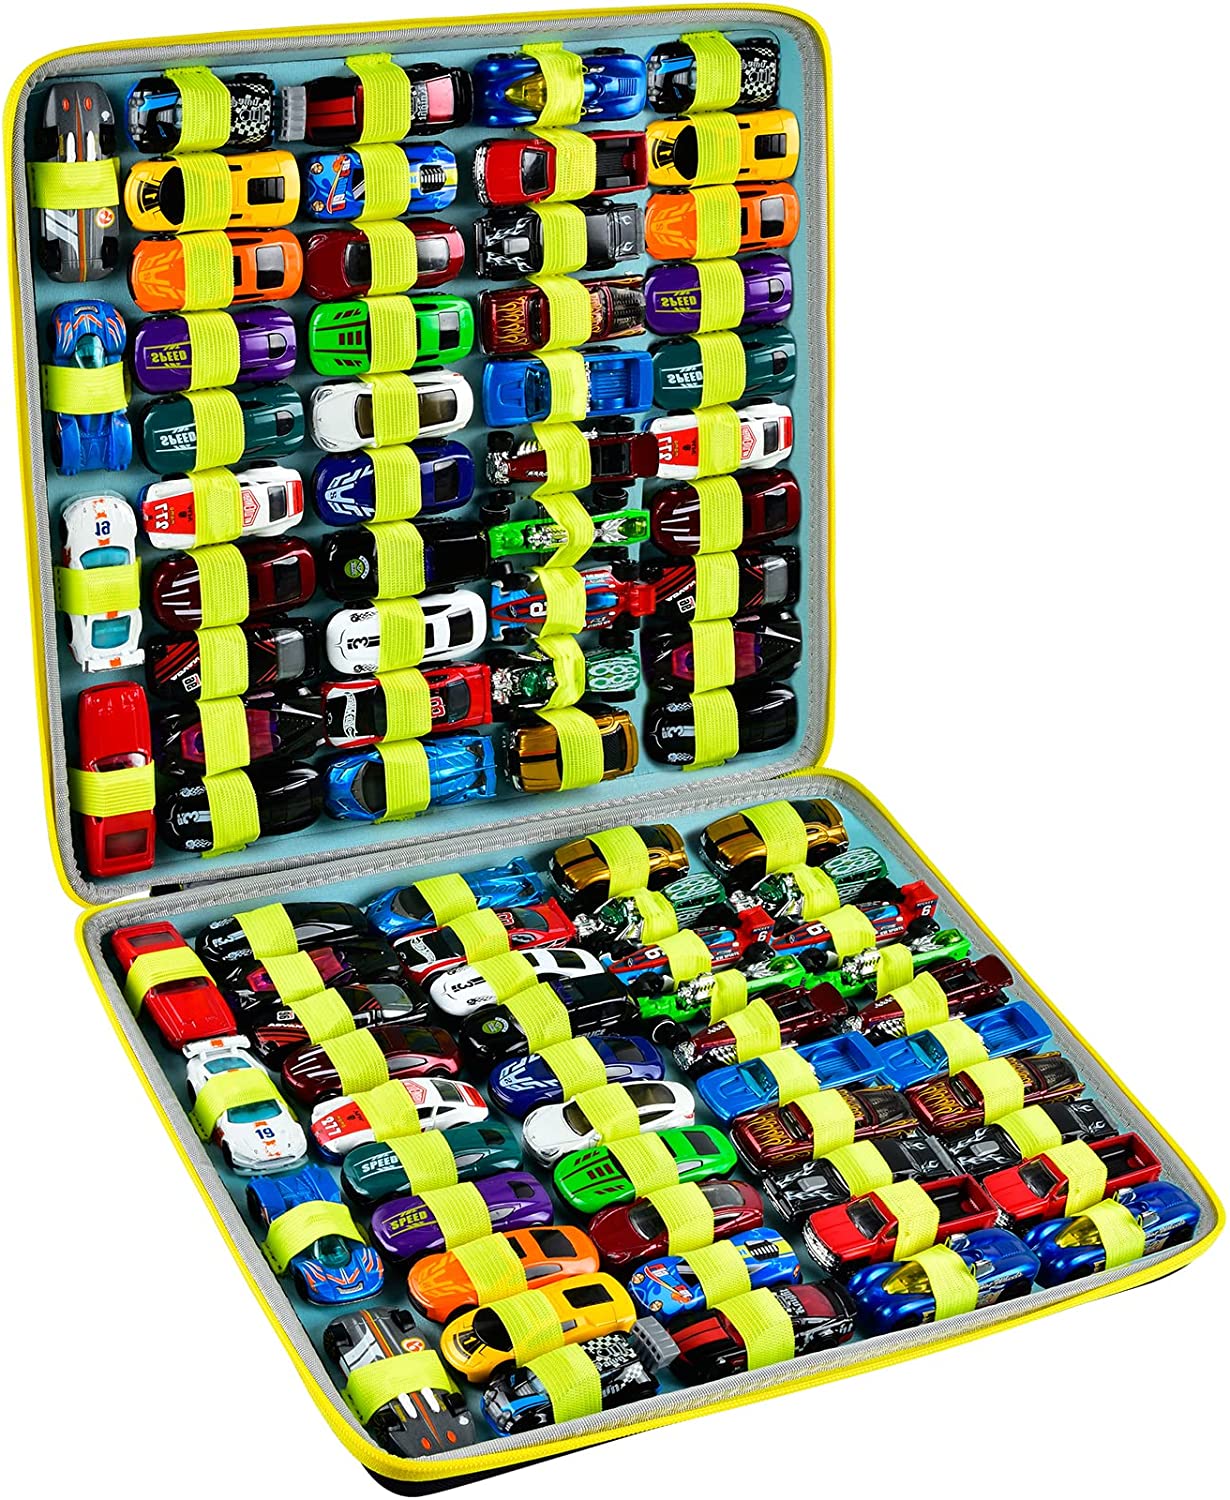 88 Toy Storage Organizer Case Compatible with Hot Wheels/for Matchbox –  PAIYULE